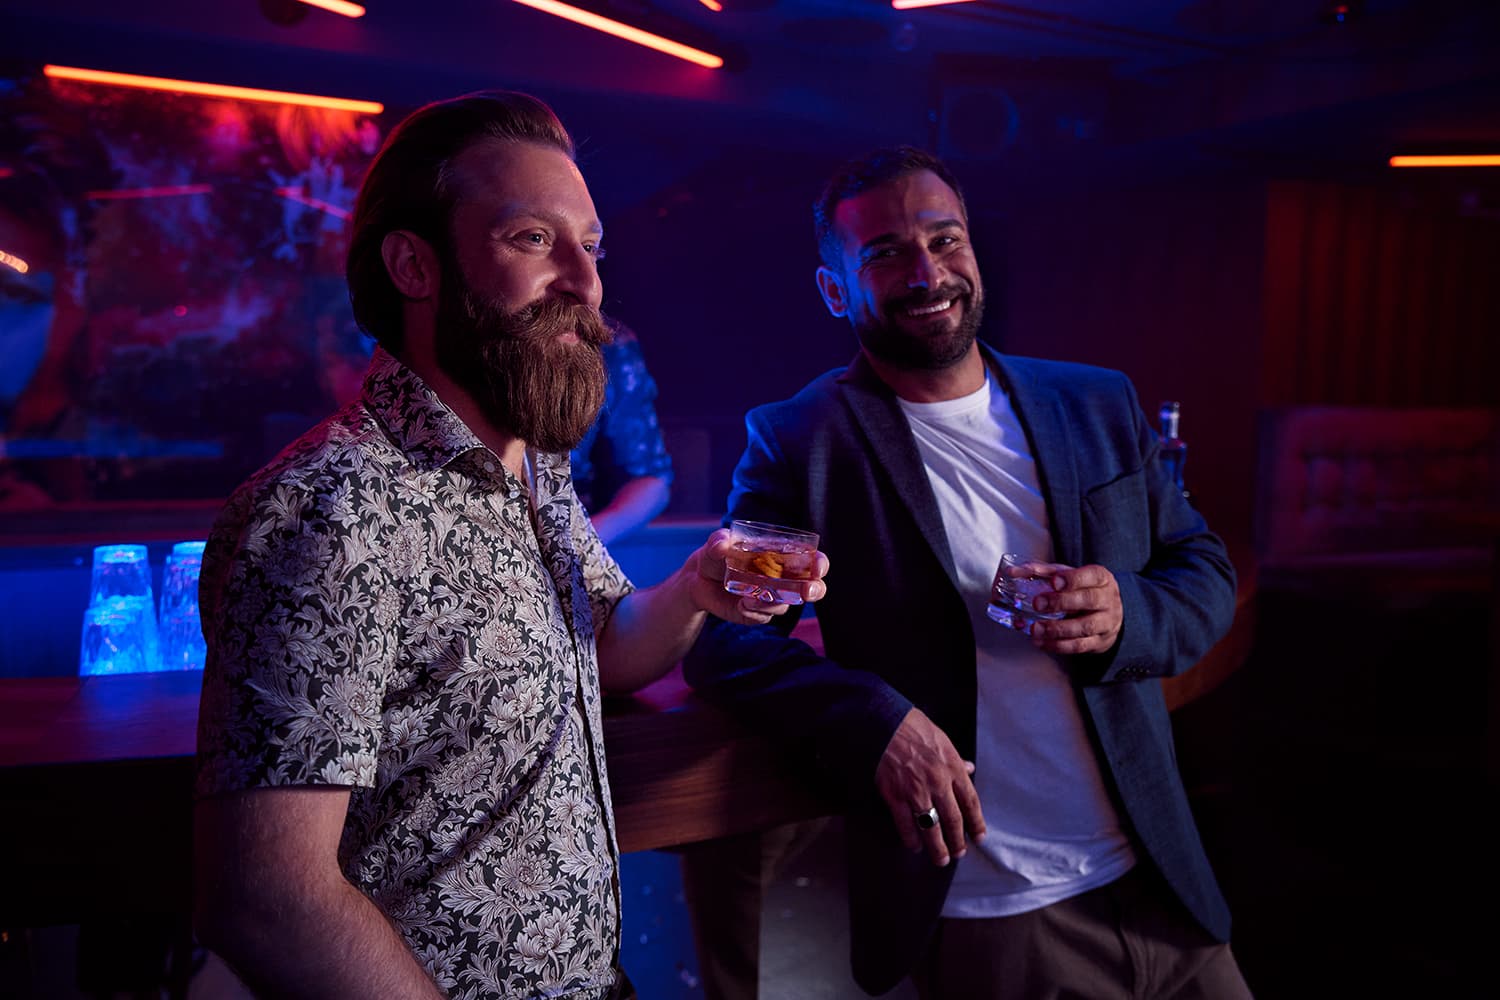 Two men standing at the bar drinking whiskey